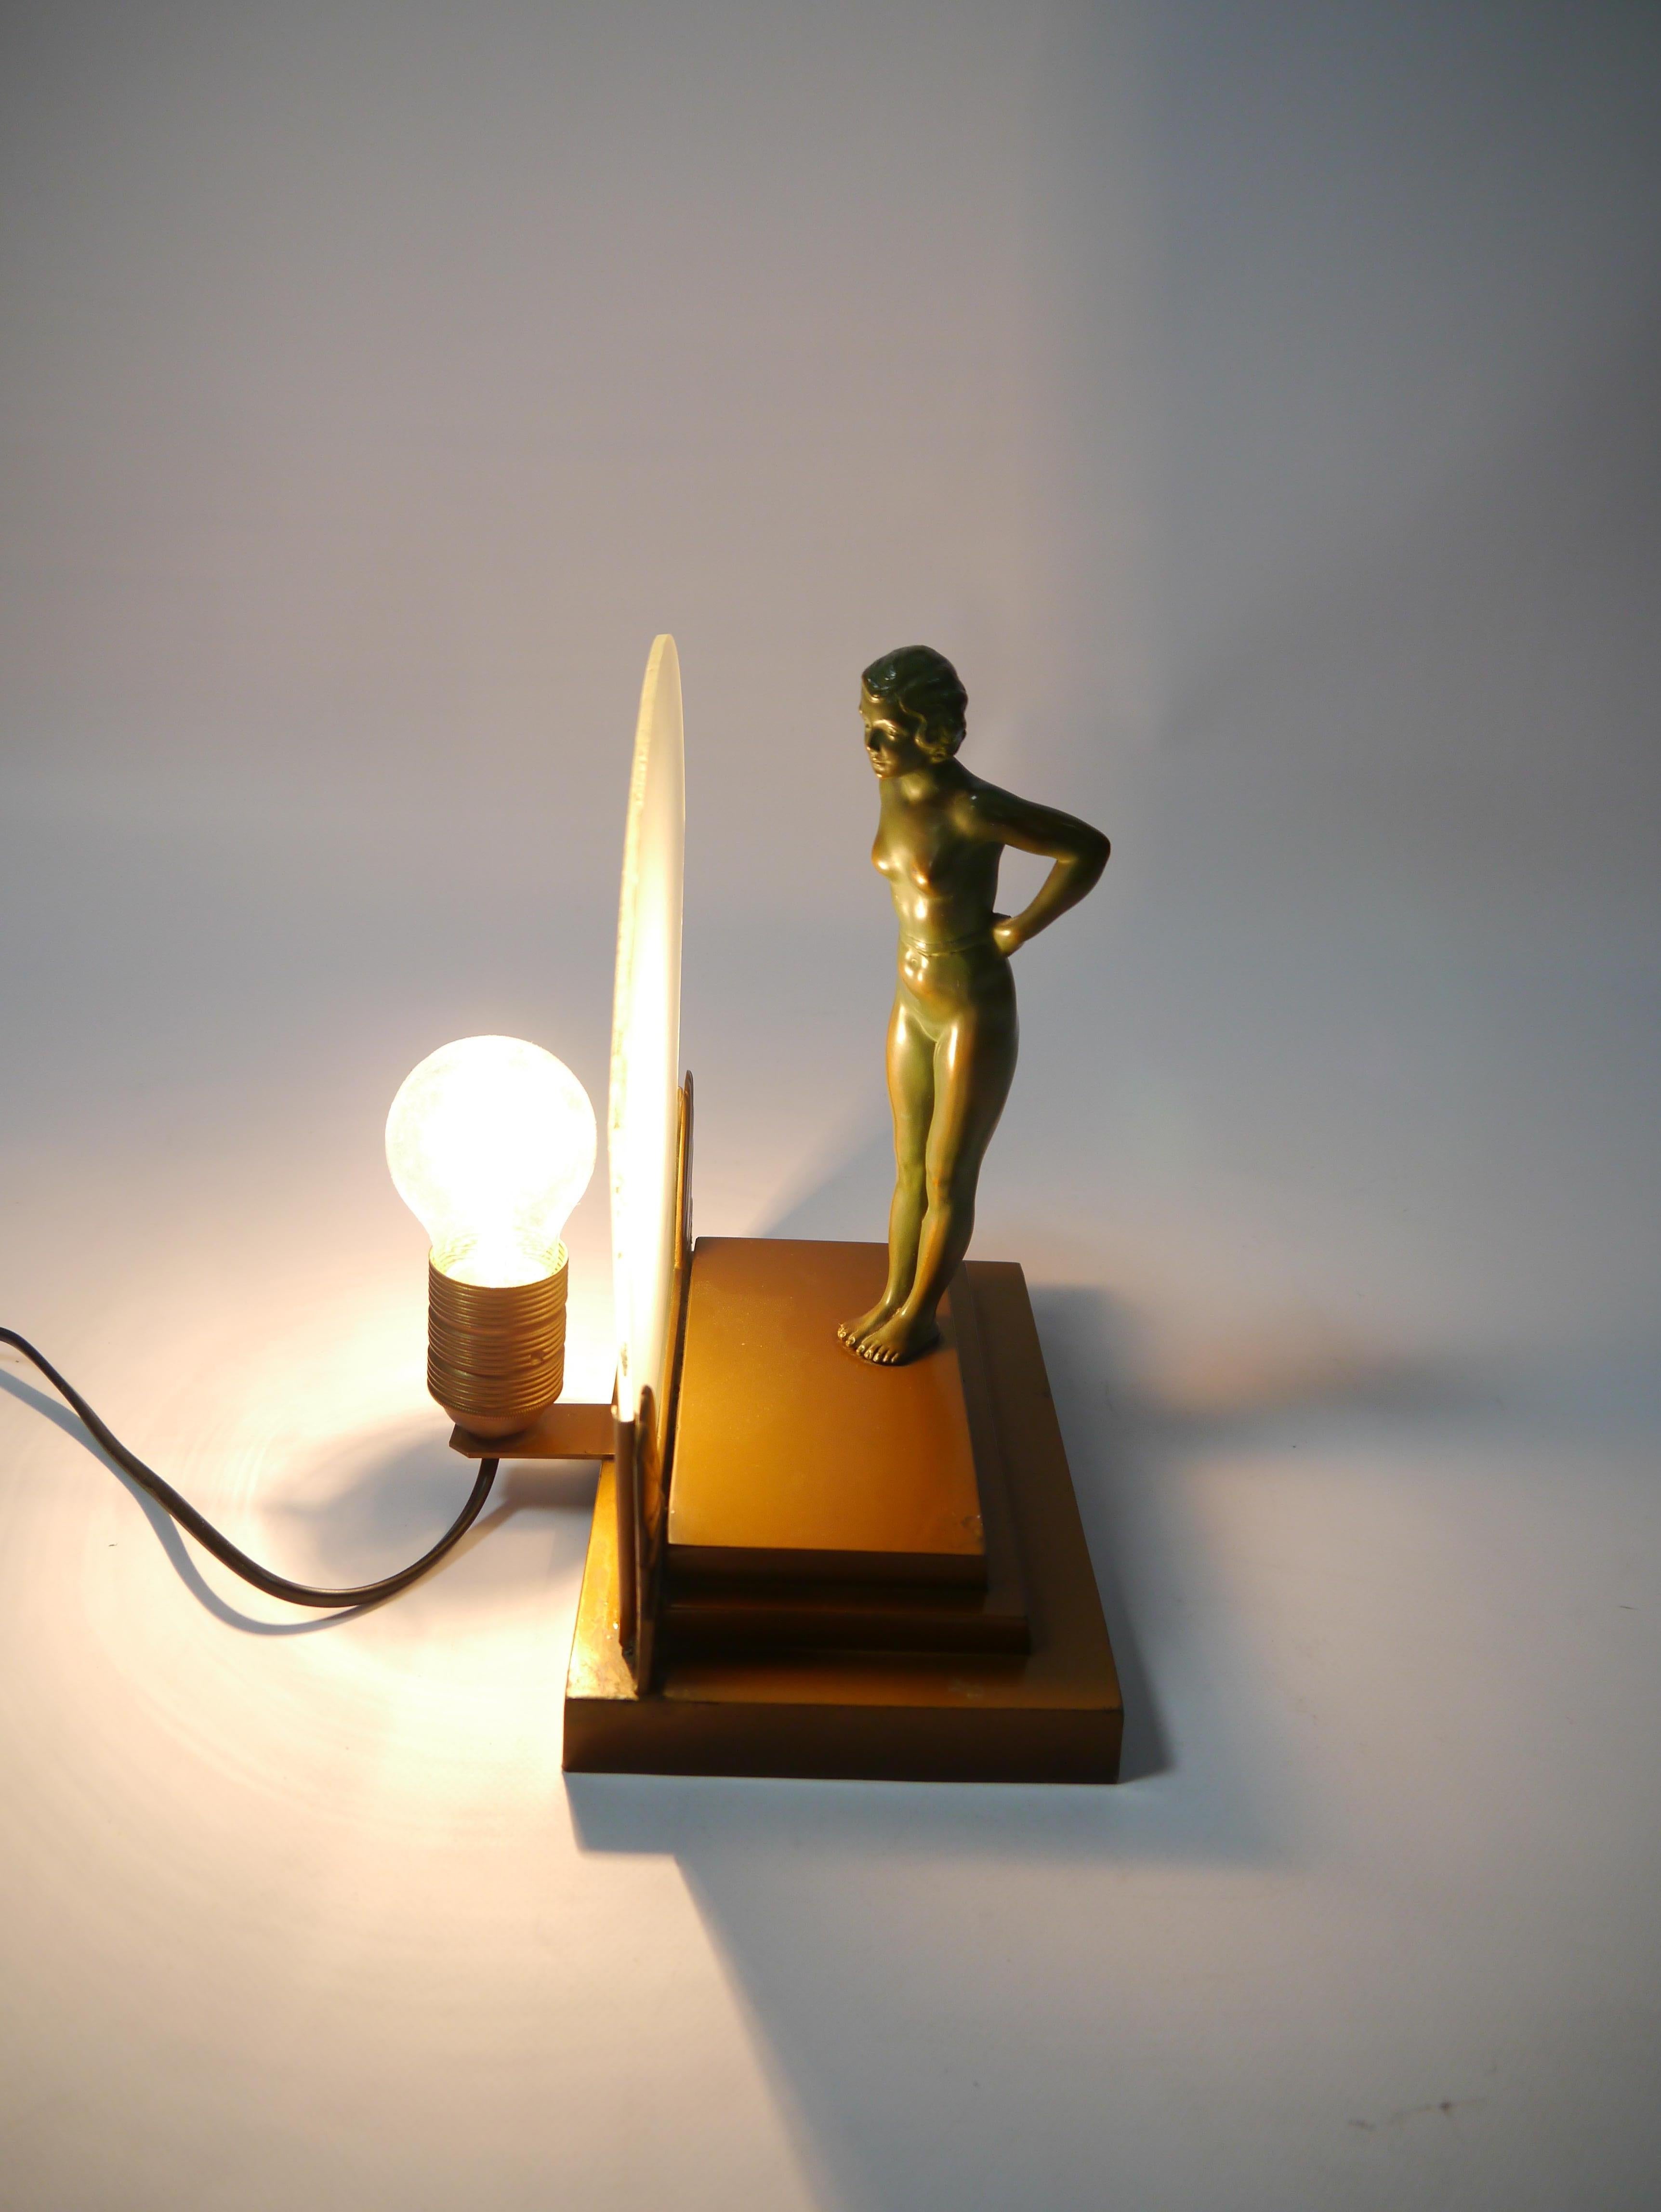 Art Deco figure lamp, showing a seminude bronze female figure standing on a podium and leaning towards a frosted glass screen. The figure can also be turned around 180 degrees. The figure shows delicate detailing and beautiful age related patina.